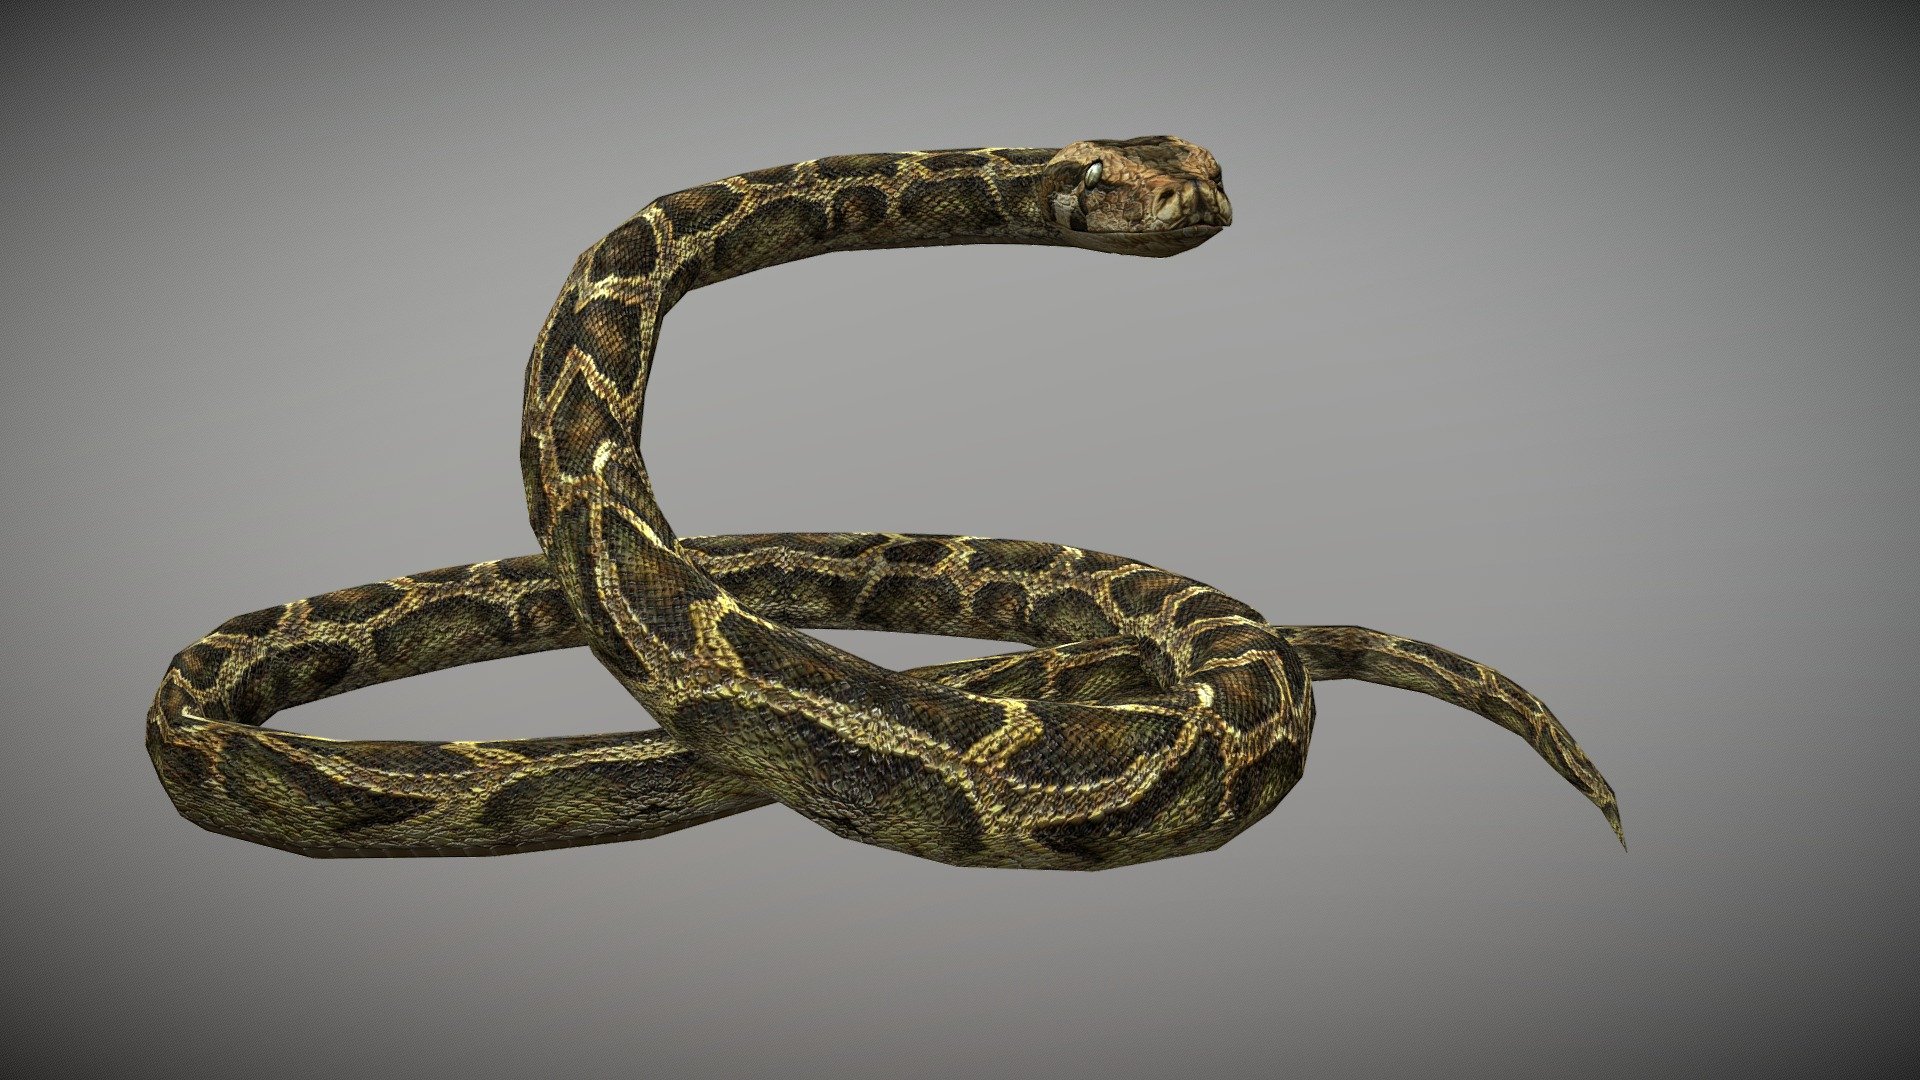 WATCH =
3D Anaconda Python Realistic Character


PACKAGE INCLUDE



High quality model, correctly scaled for an accurate representation of the original object

High Detailed Photorealistic Anaconda, completely UVmapped and smoothable

Model is built to real-world scale.

Many different format like blender, fbx, obj, iclone, dae

Separate Loopable Animations

Ready for animation

High Quality materials and textures

Triangles = 4252

Vertices = 2295

Edges = 6498

Faces = 4252


ANIMATIONS



Idle

Crowl

Crowl Fast

Swim

Attack

Defense

terrified

+Many different 3d Print Poses


NOTE



GIVE CREDIT BILAL CREATION PRODUCTION

SUBSCRIBE YOUTUBE CHANNEL = https://www.youtube.com/BilalCreation/playlists

FOLLOW OUR STORE = https://sketchfab.com/bilalcreation/models

LIKE AND GIVE FEEDBACK ON THE MODEL


CONTACT US                 =  https://sites.google.com/view/bilalcreation/contact-us

ORDER  DONATION   =  https://sites.google.com/view/bilalcreation/order - Anaconda Animated - Buy Royalty Free 3D model by Bilal Creation Production (@bilalcreation) 3d model